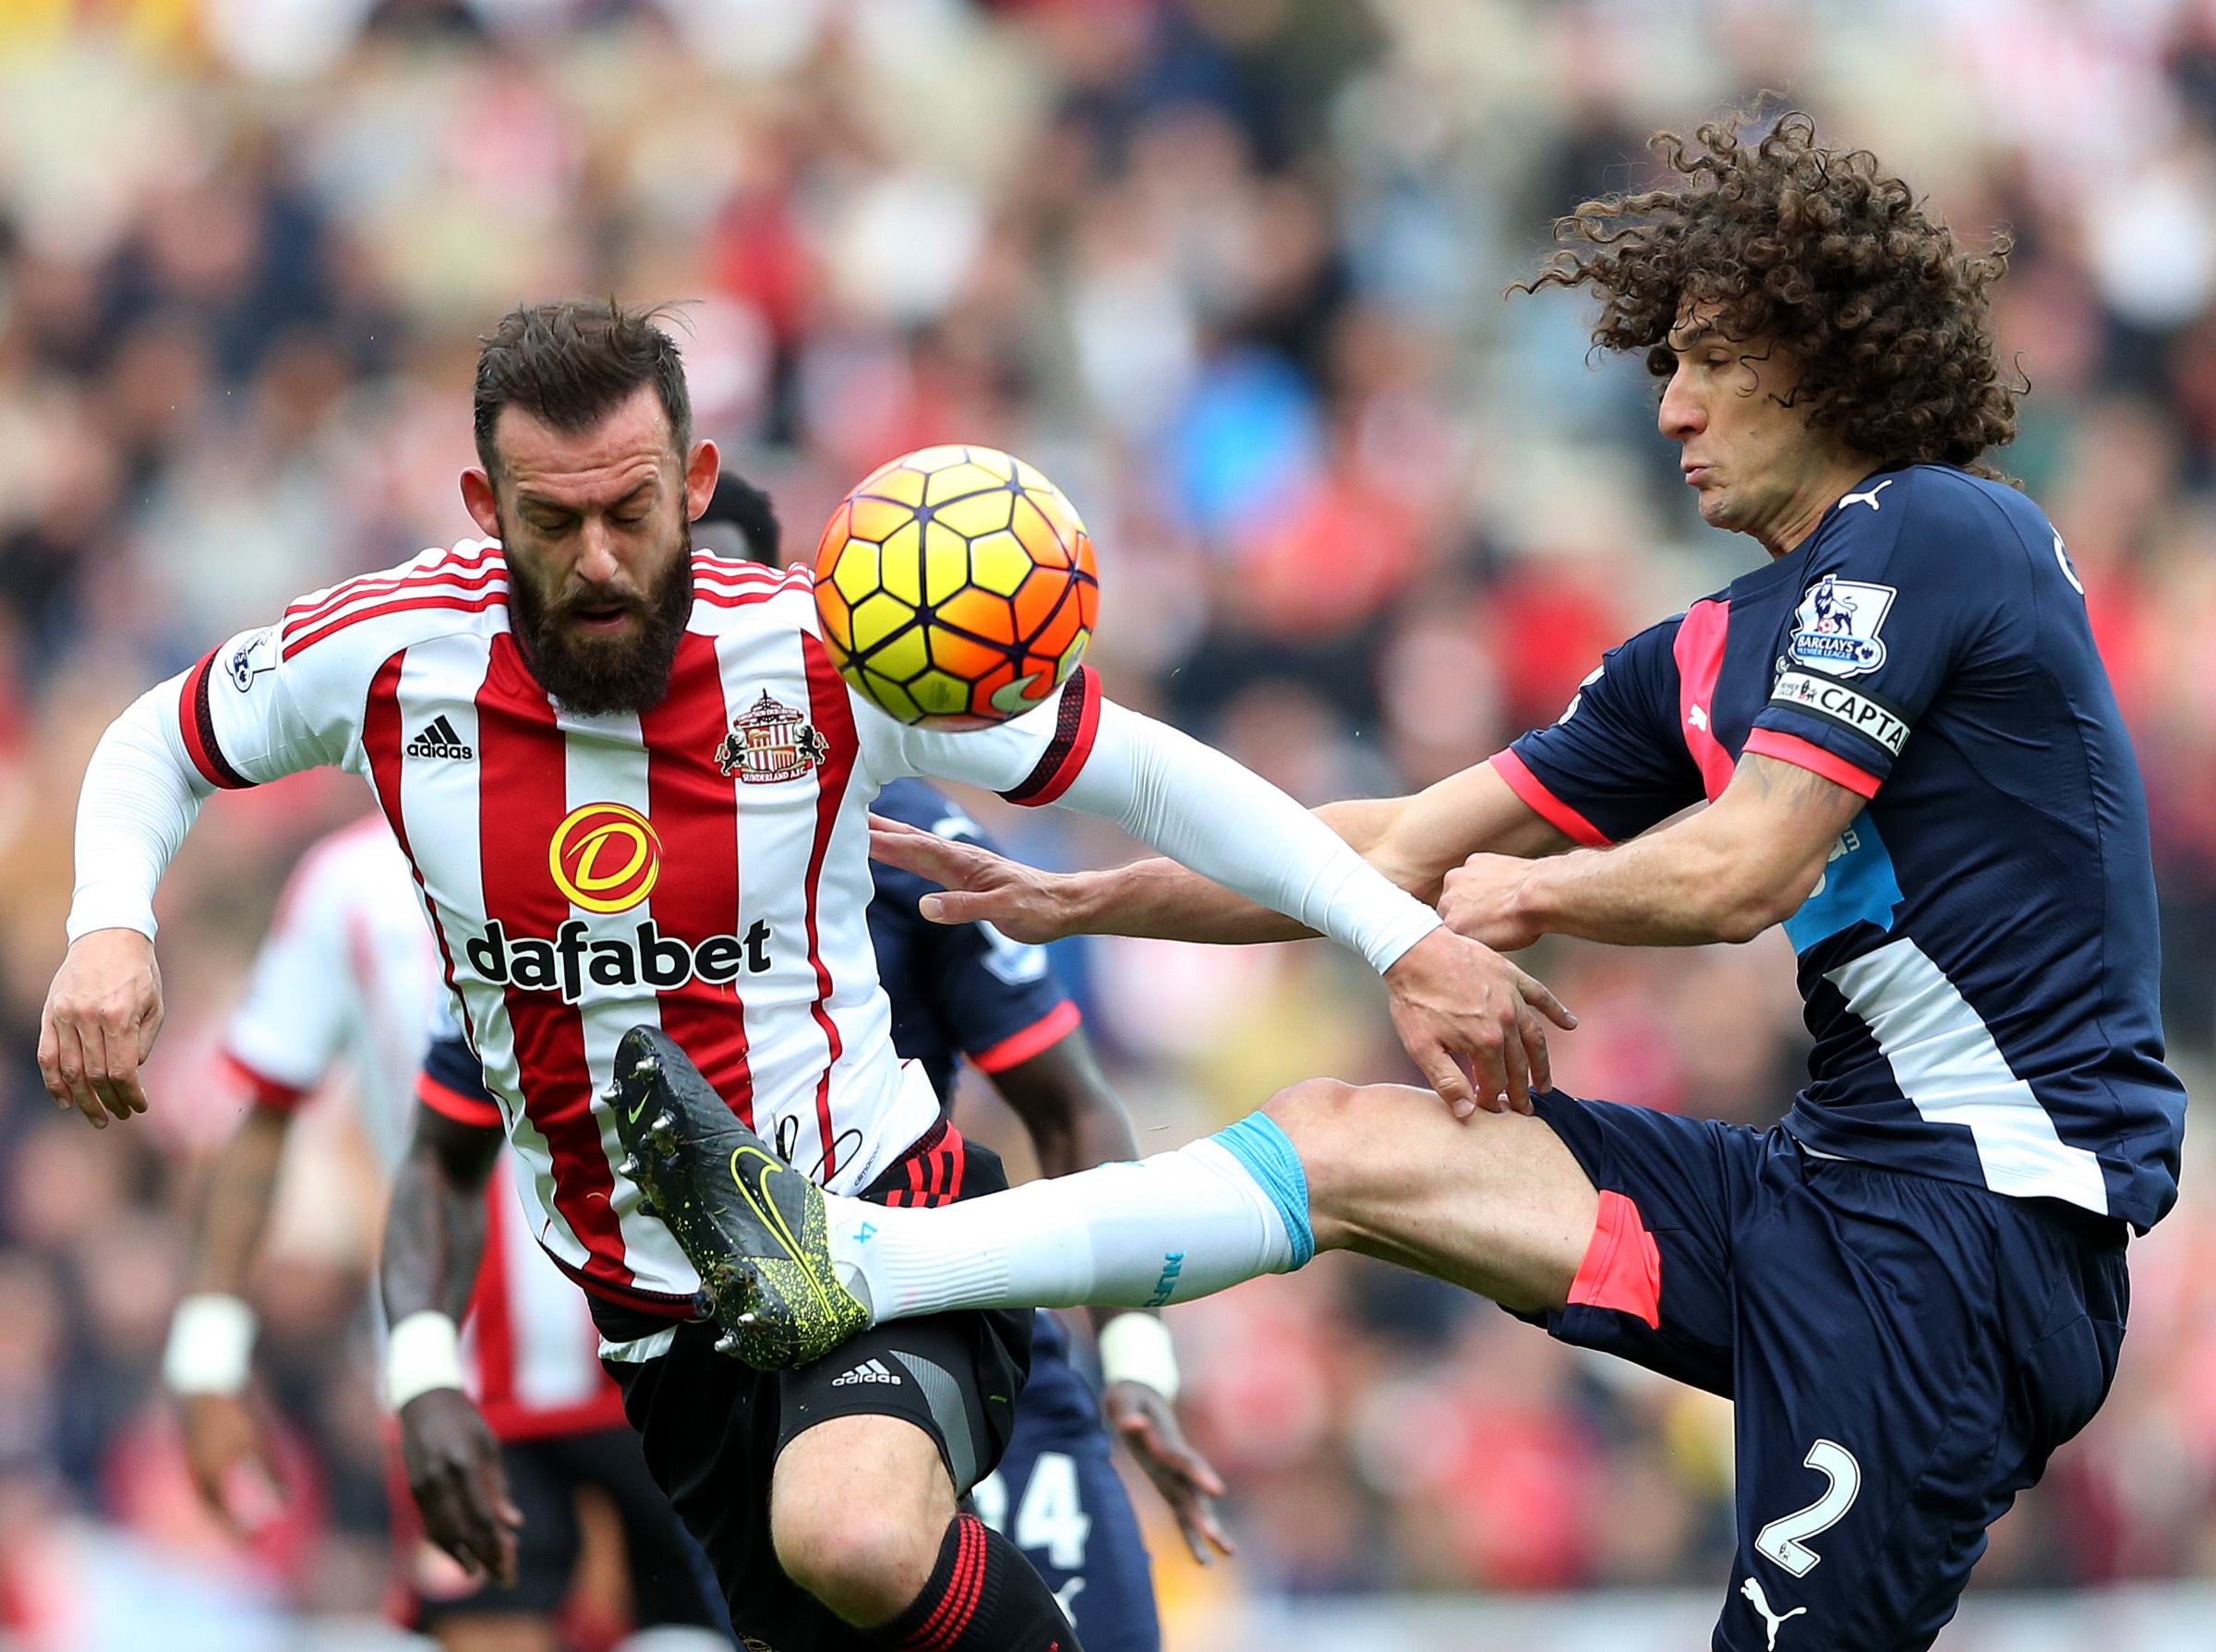 FILE- In this Oct. 25, 2015 file photo, Sunderland's Steven Fletcher, left, vies for the ball with Newcastle United's captain Fabricio Coloccini, during their English Premier League soccer match between Sunderland and Newcastle United at the Stadium of Light, Sunderland, England. By coincidence, several European leagues have derby matches between neighboring teams on Sunday. (AP Photo/Scott Heppell, File)